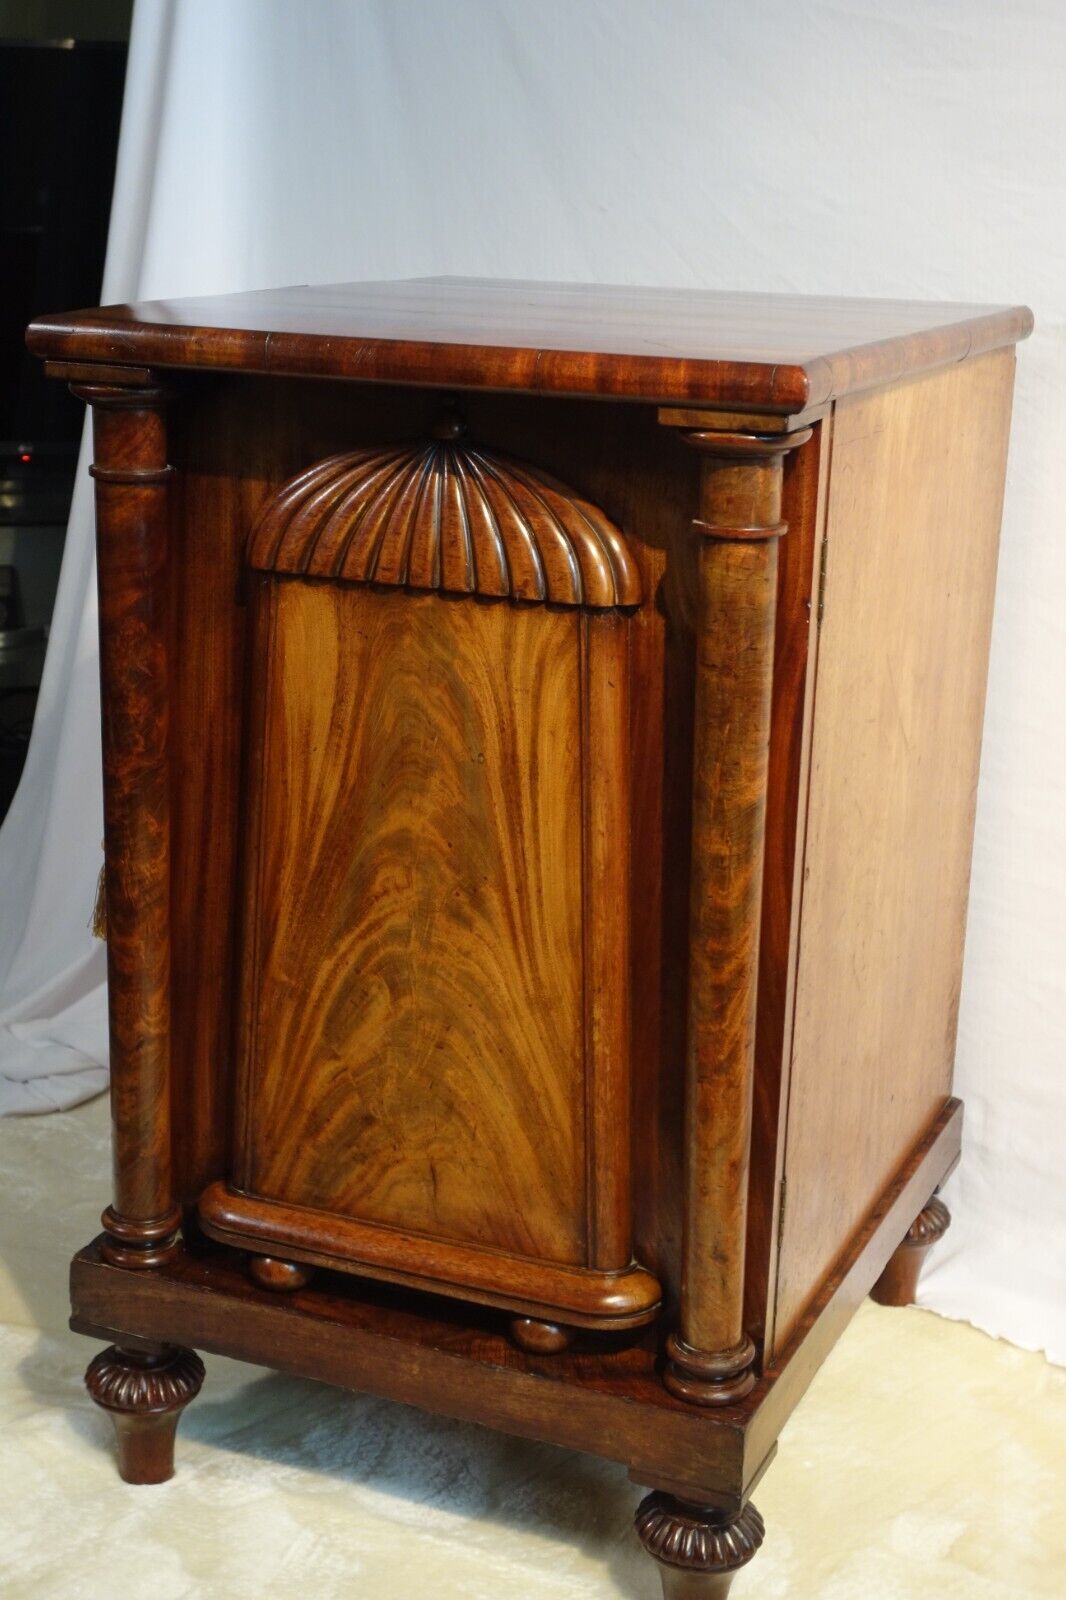 A Very Good William IV Flame Mahogany Pedestal Cabinet